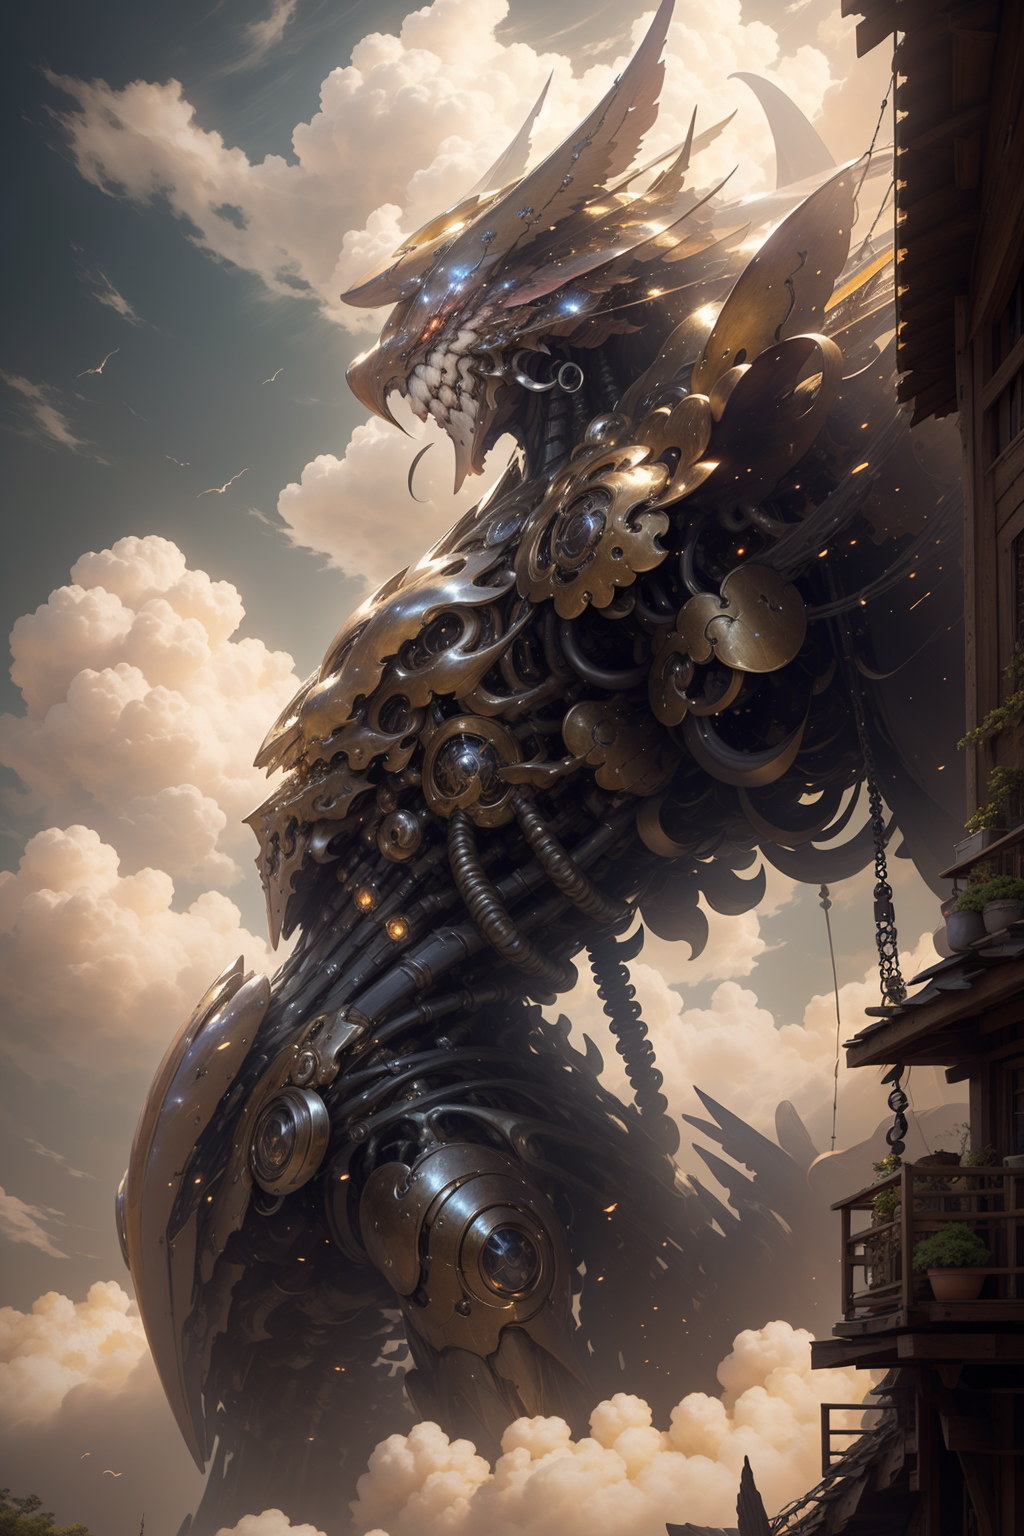 A fantastical robot with gold gears on a cloudy sky background.